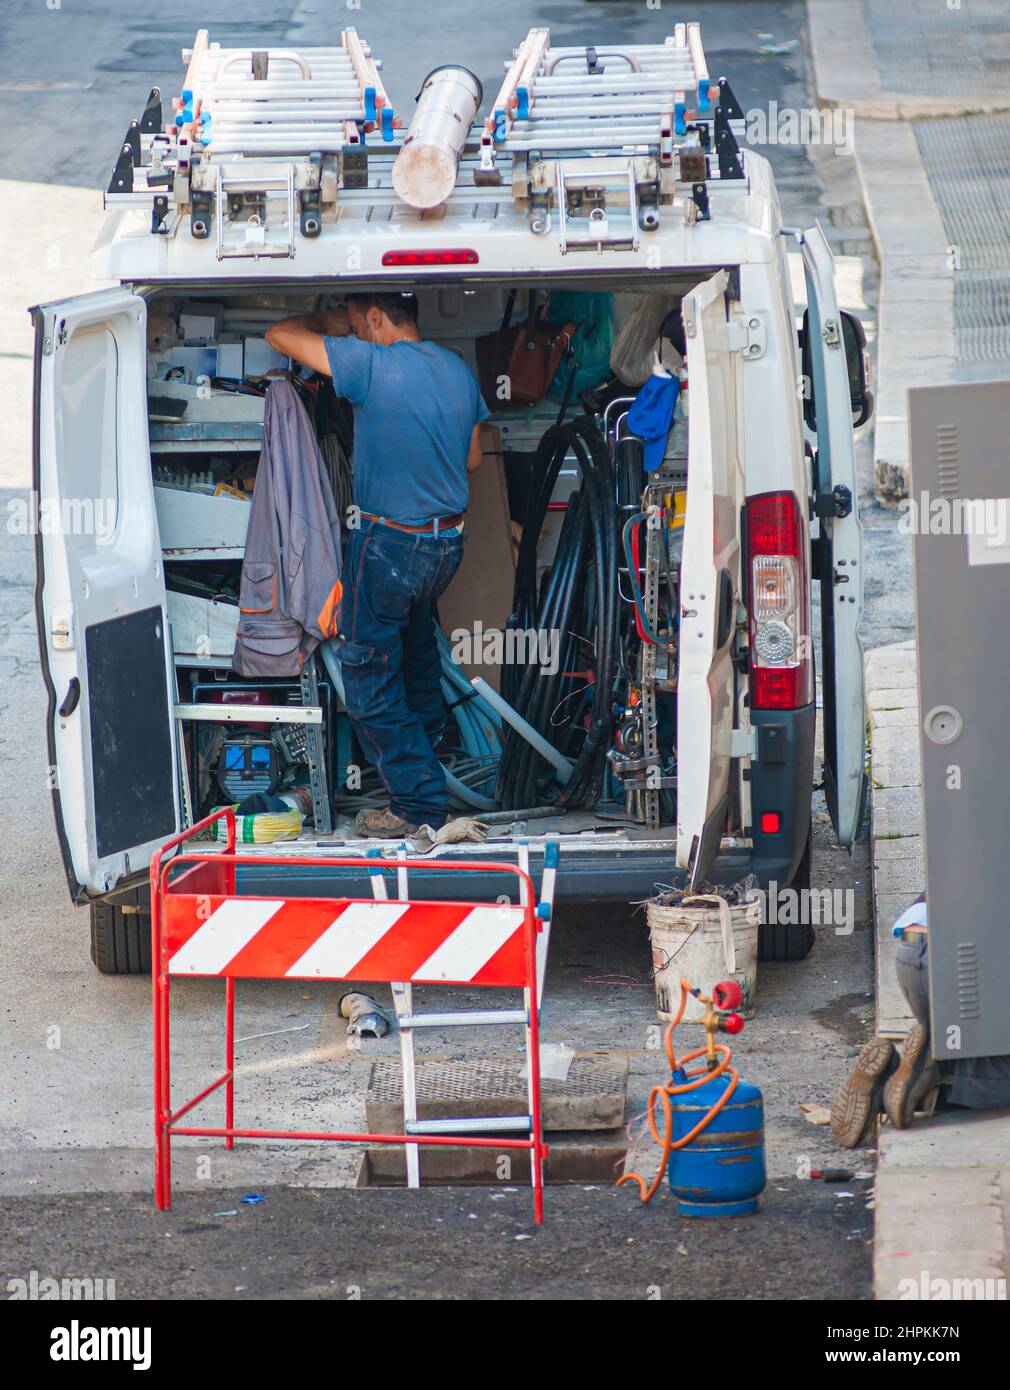 Worker inside his van, loaded with tools, protected from traffic with cones while repairing. Stock Photo